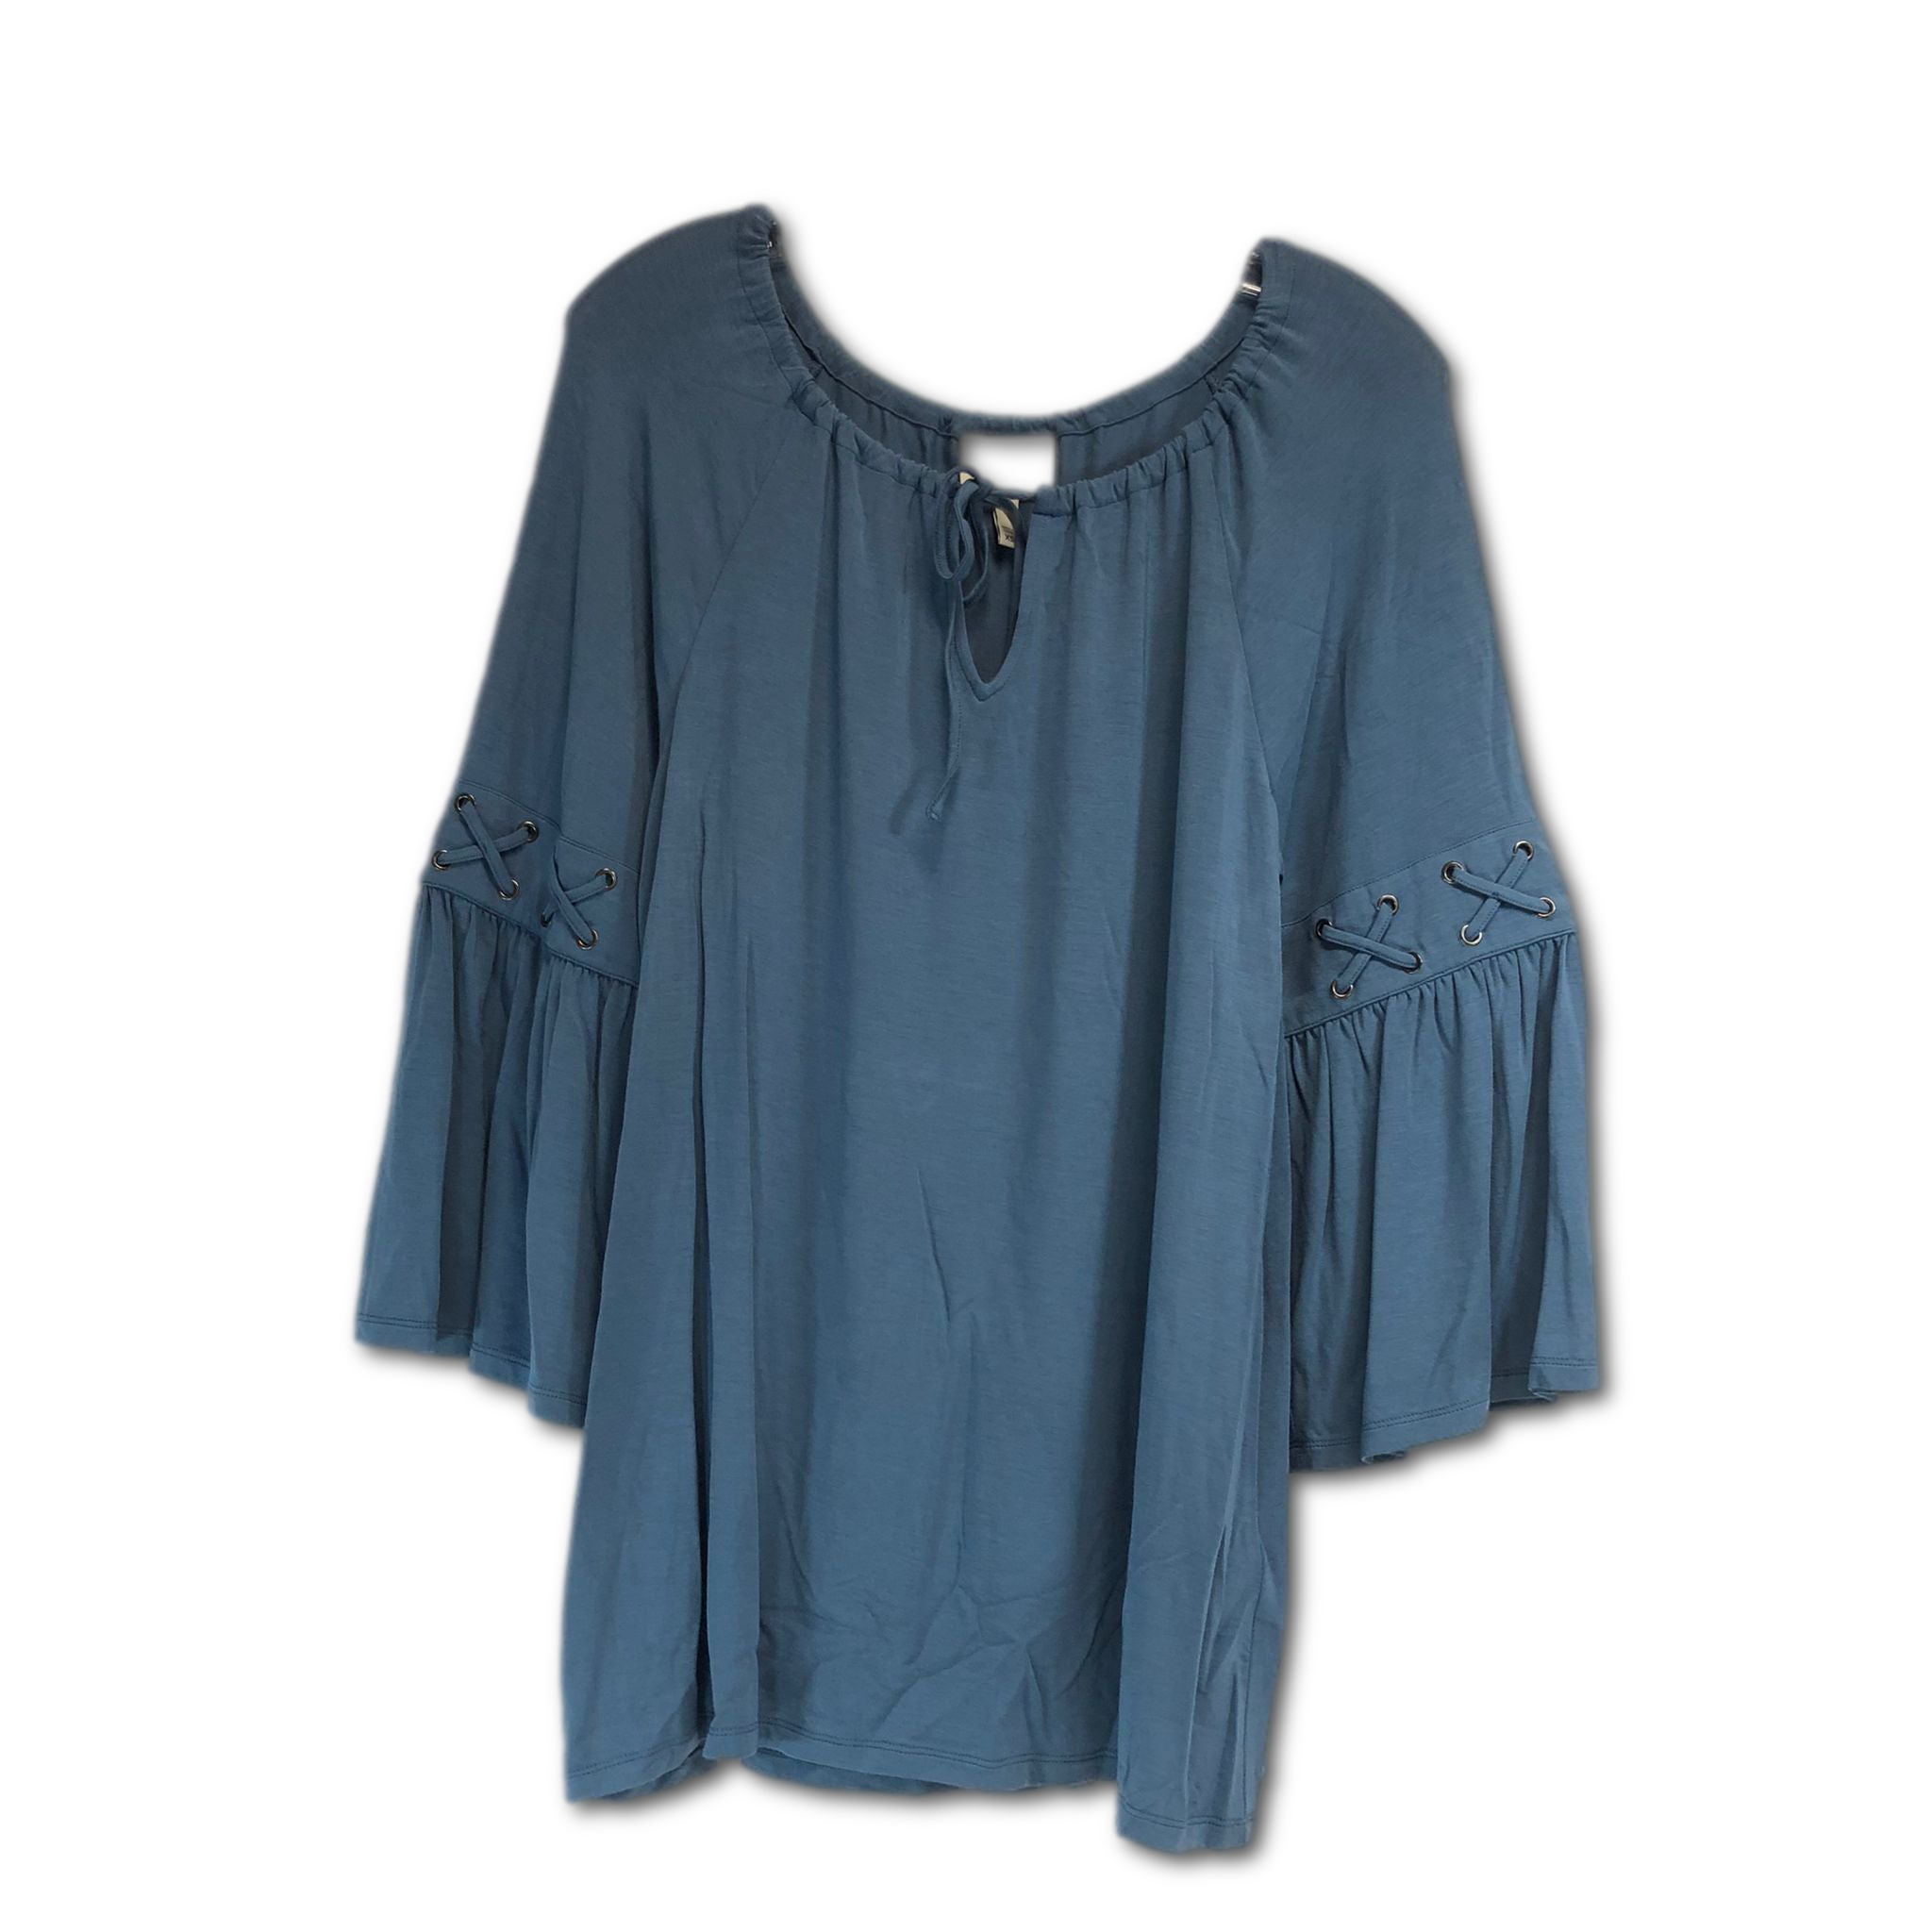 Haute Hippie Tribe Knit Top w/ Bell Sleeve and Lace Up Detail